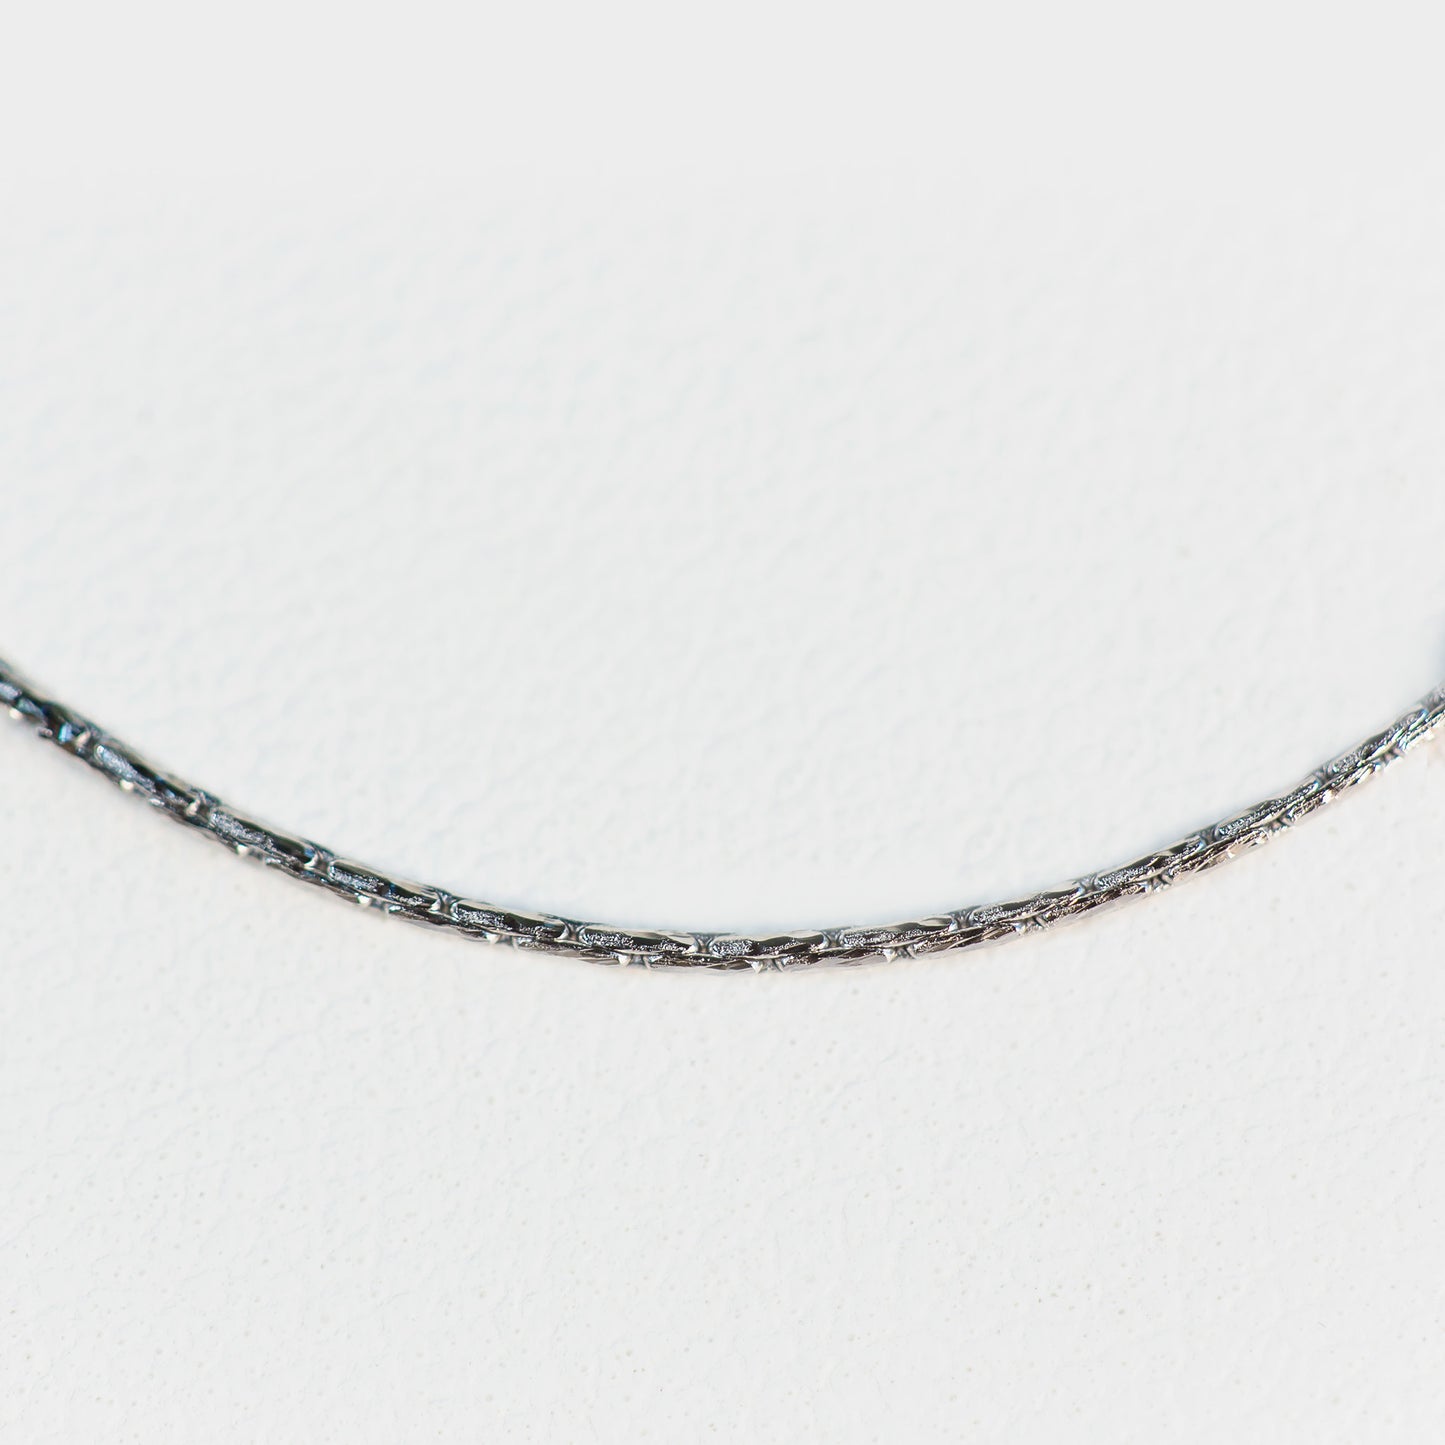 Sterling Silver Elegant Bamboo Chain